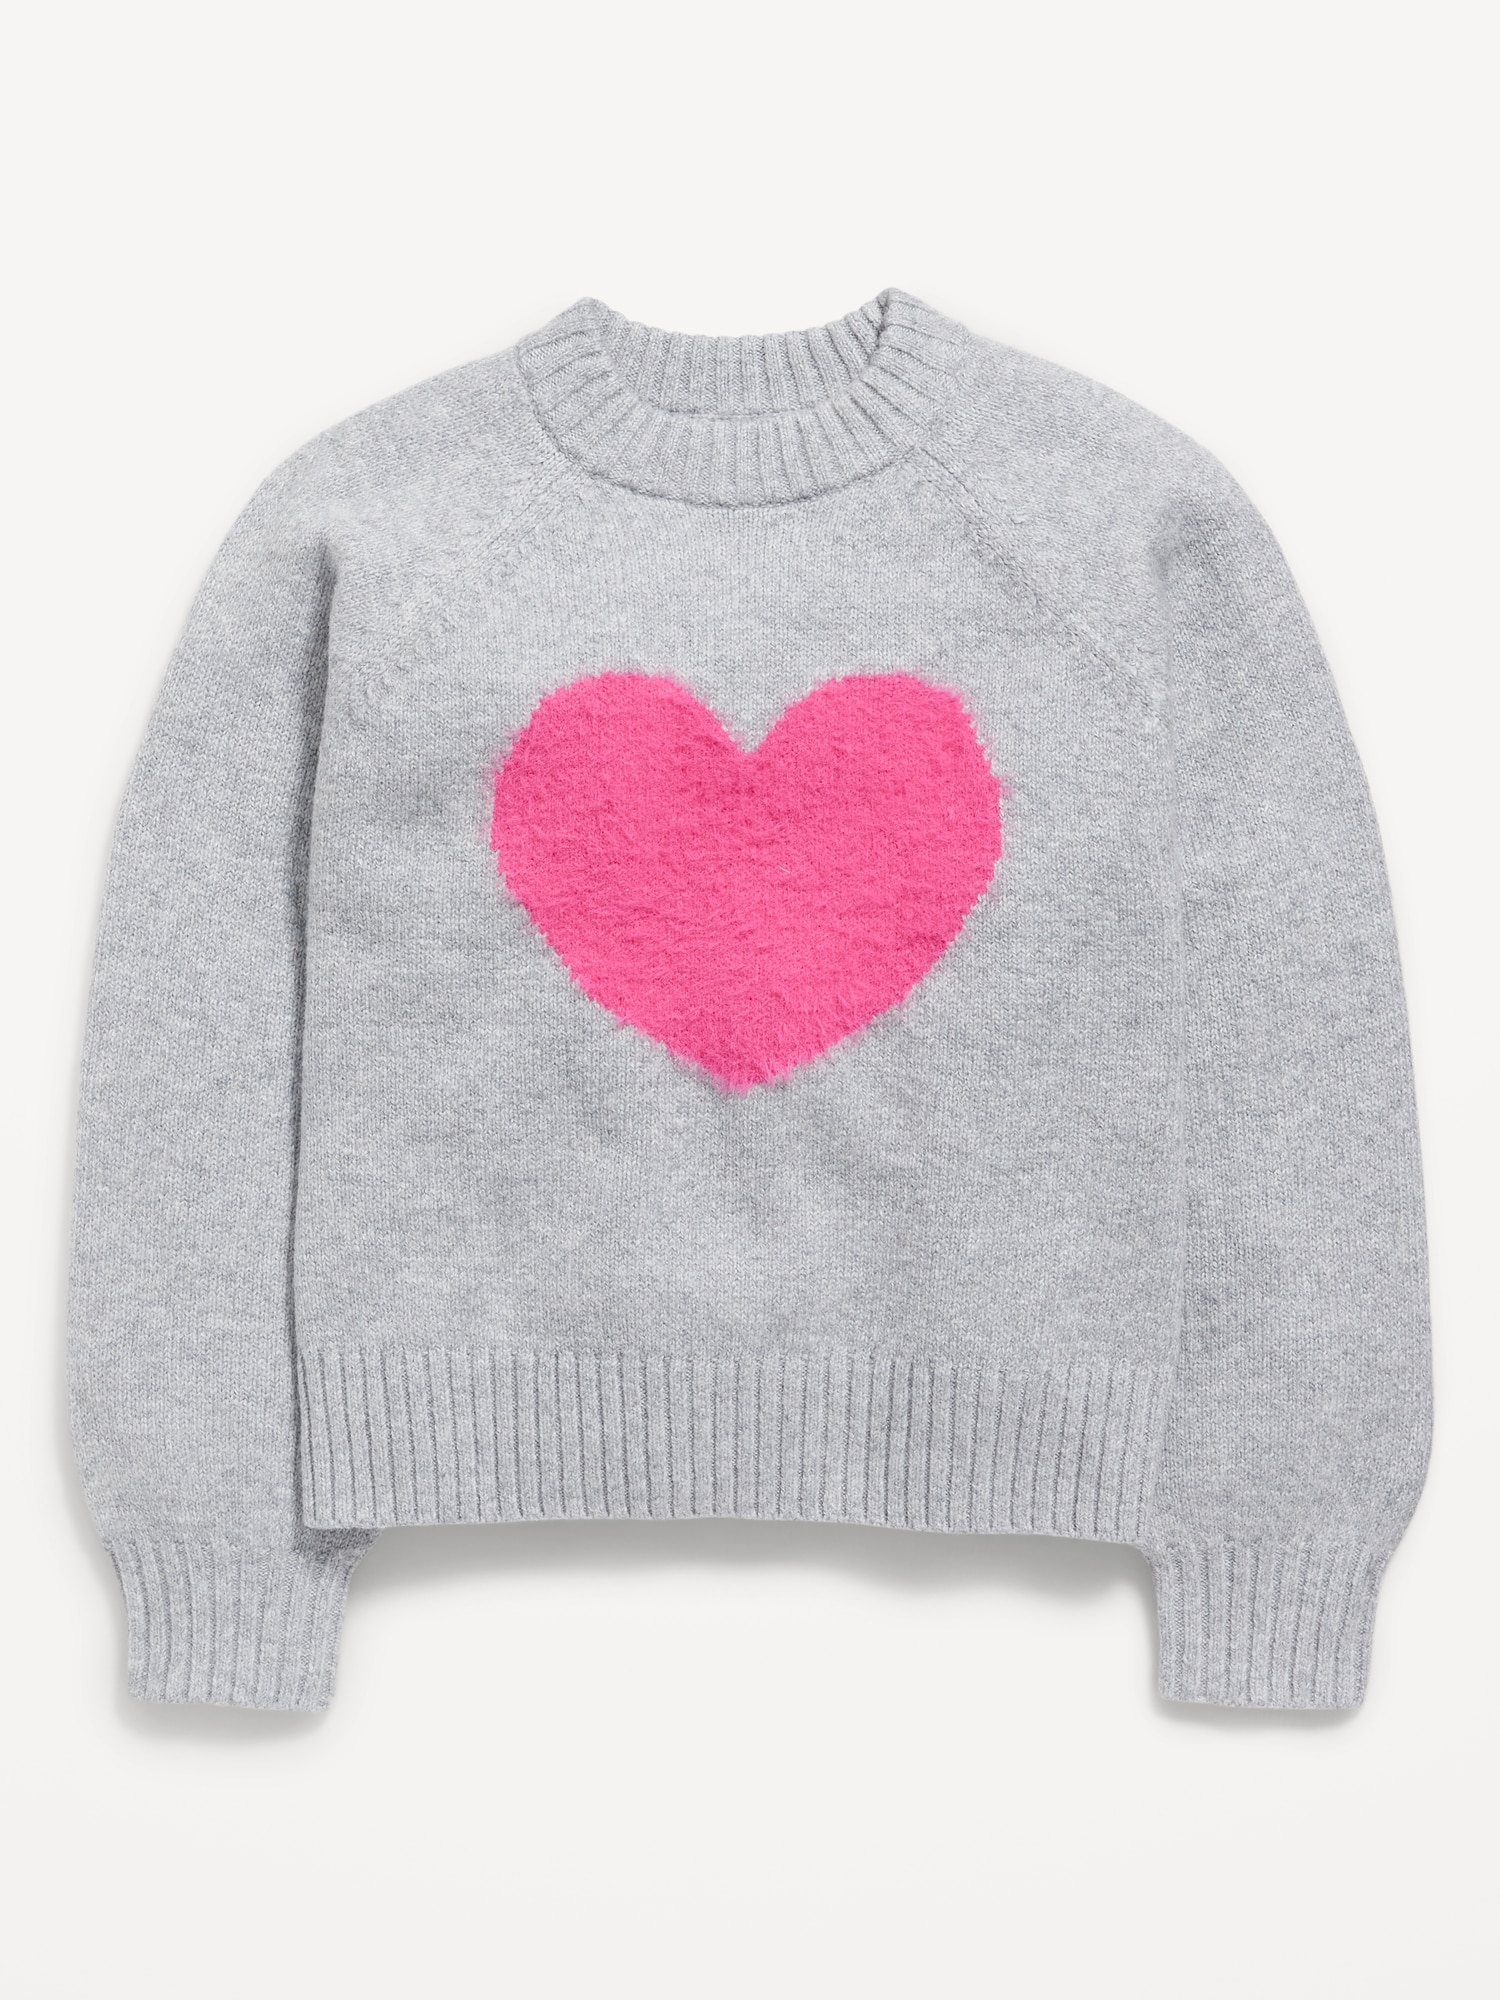 Cozy Mock-Neck Graphic Pullover Sweater for Girls | Old Navy